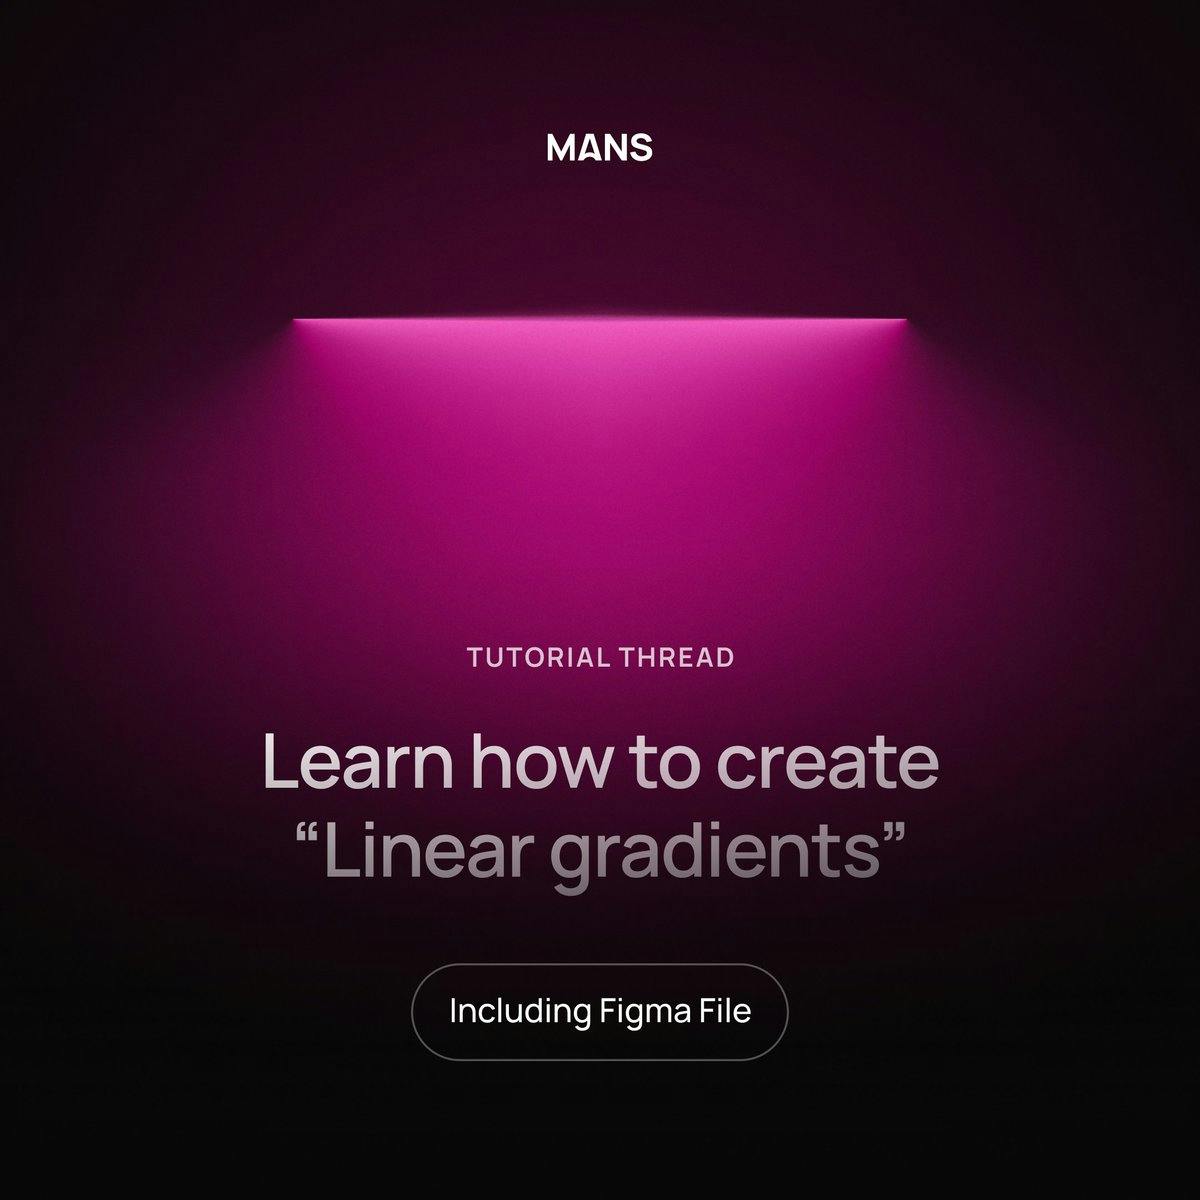 New Tutorial! ✨

Learn how to create "@linear gradients" with @figma in just a few easy steps.

Let's get started 👇 https://t.co/08wGSA9Ij1